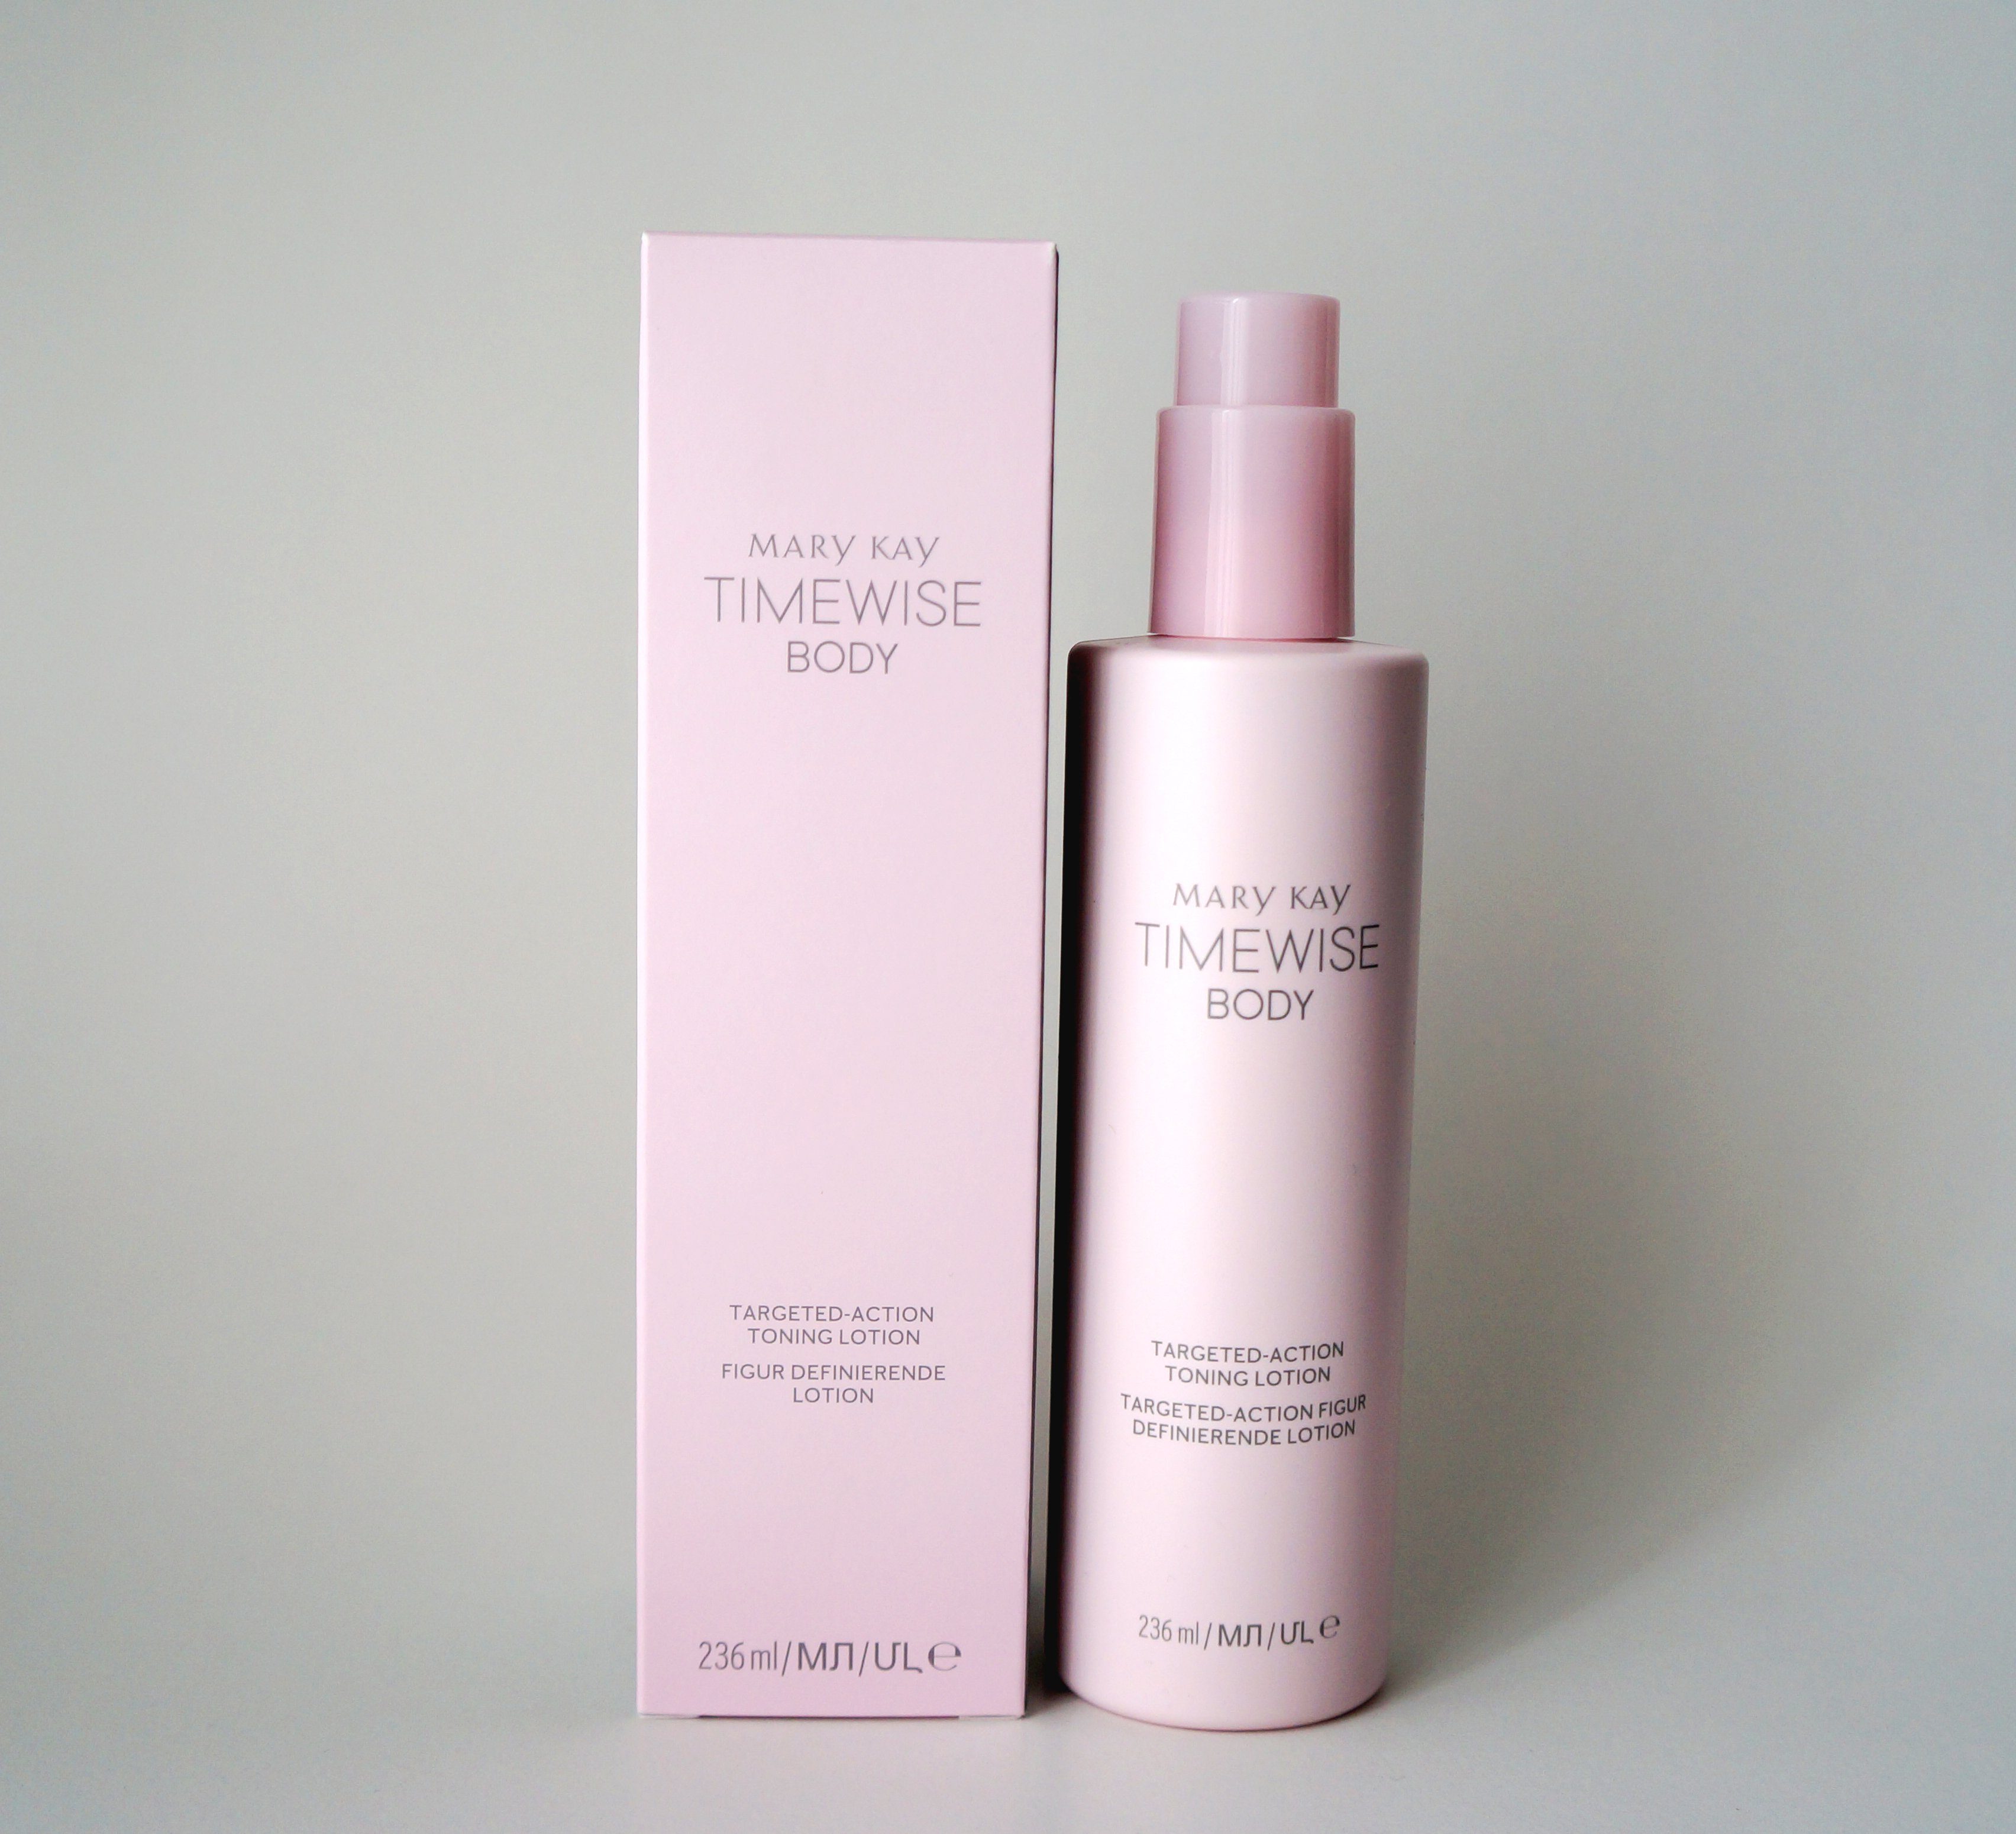 Körperlotion Lotion Kay Targeted-Action Mary Toning Kay TimeWise Body 236ml Mary